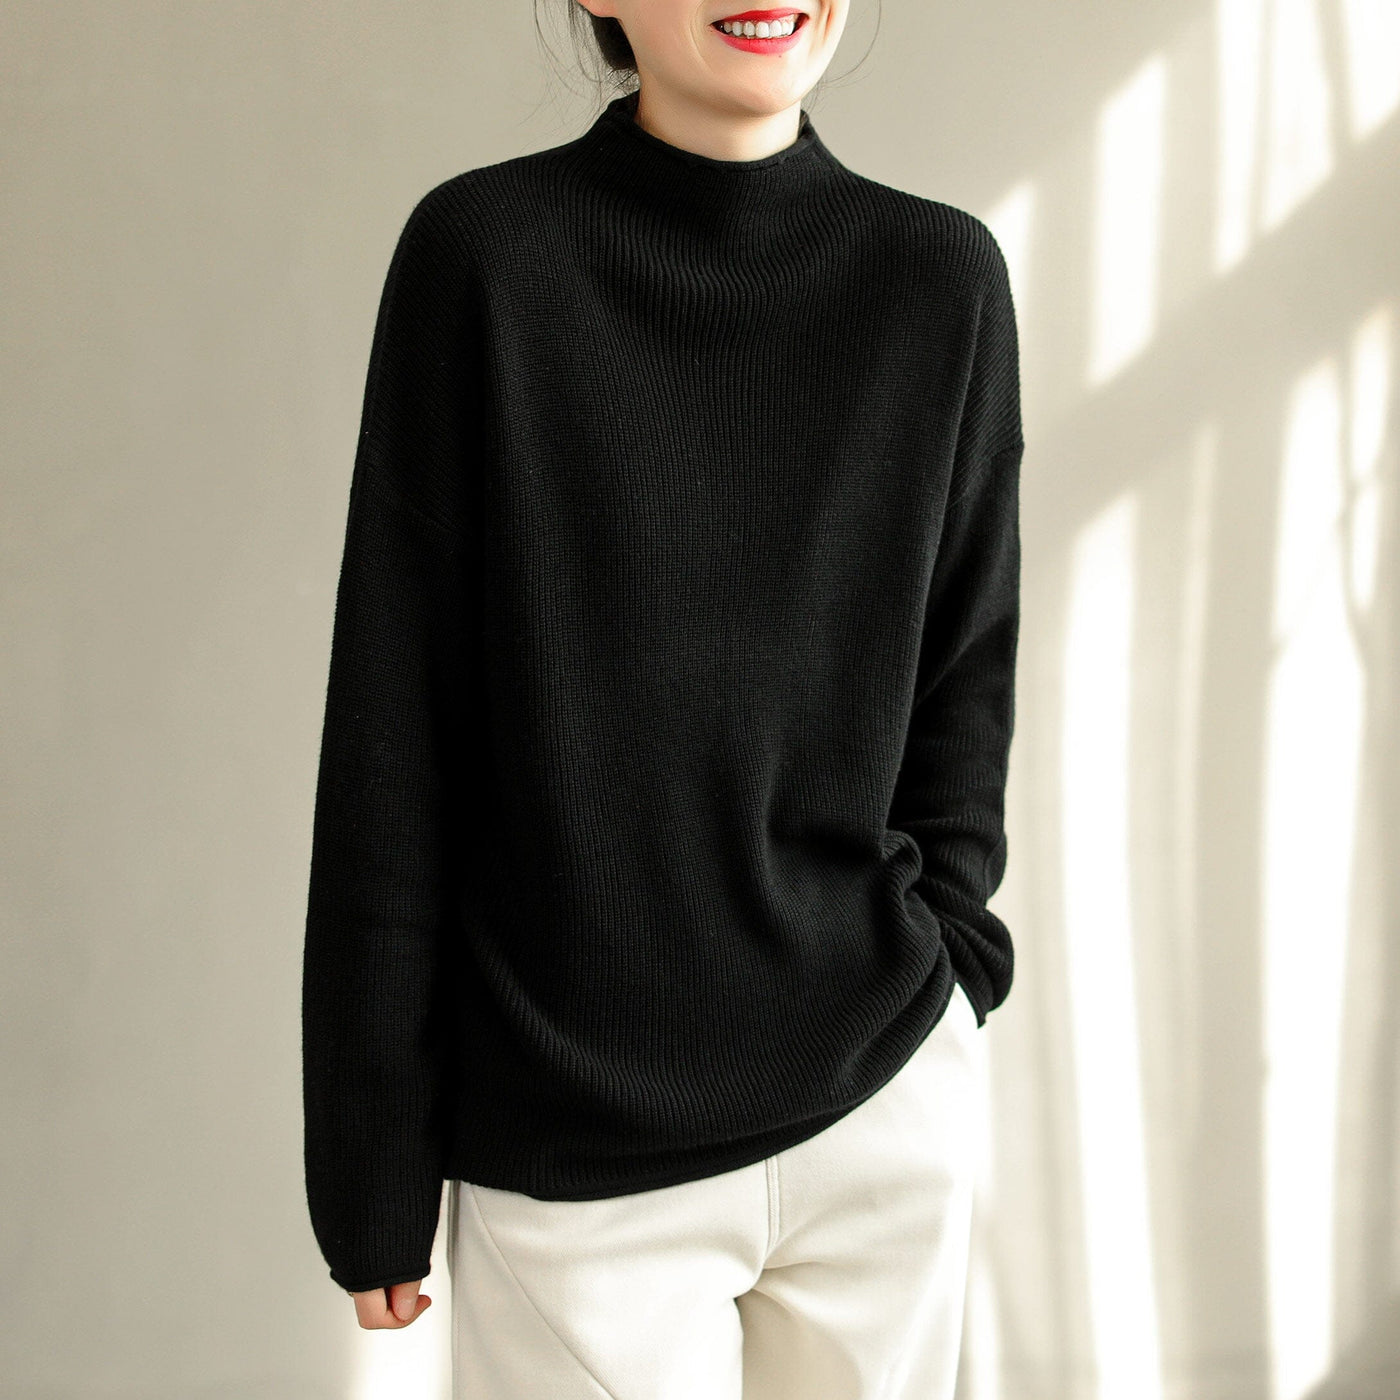 Autumn Winter Loose Solid Knitted Round Neck Sweater Nov 2022 New Arrival One Size Black 